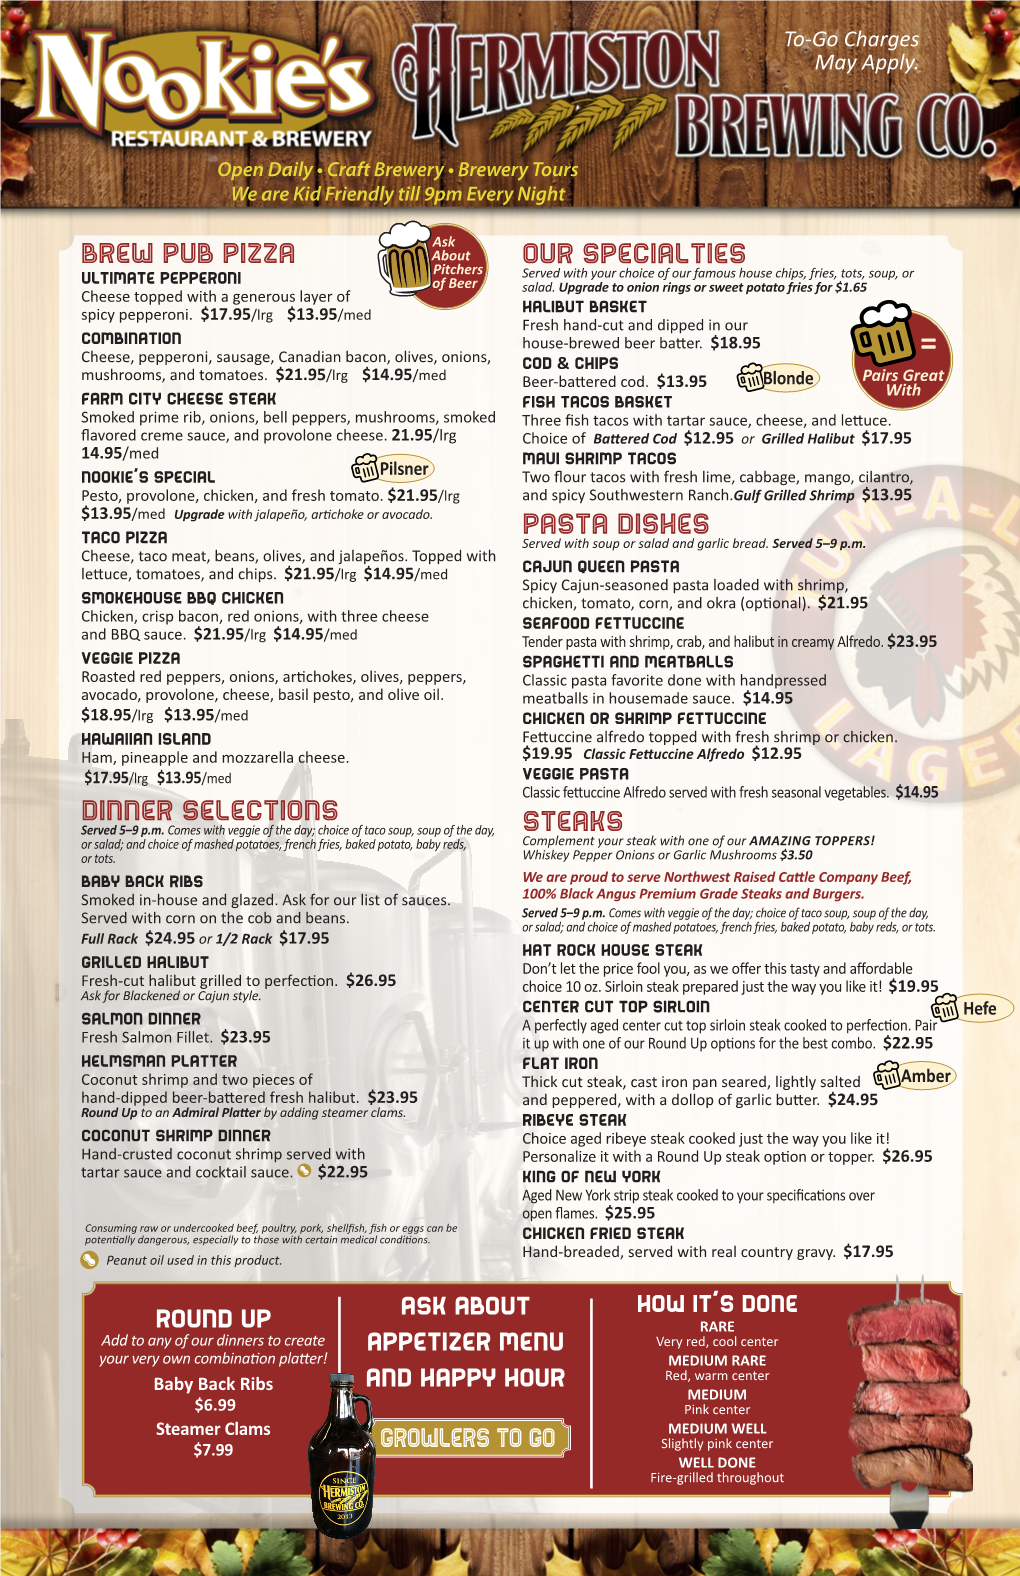 Brew Pub PIZZA Dinner Selections Our Specialties PASTA Dishes Steaks